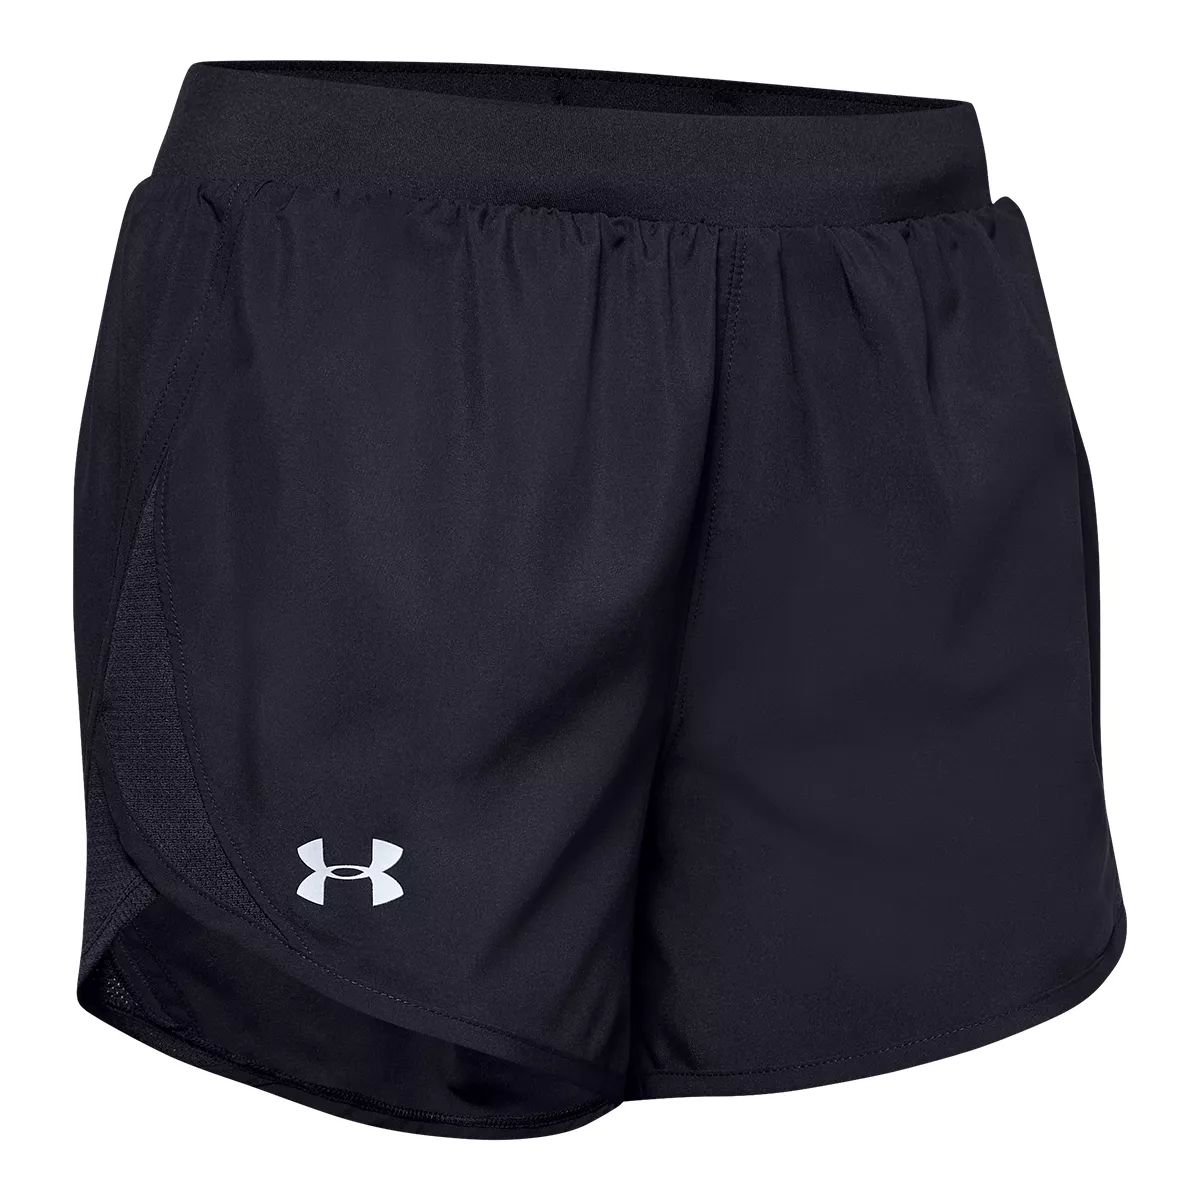  Under Armour Girls' Fly by Shorts, (001) Black/White